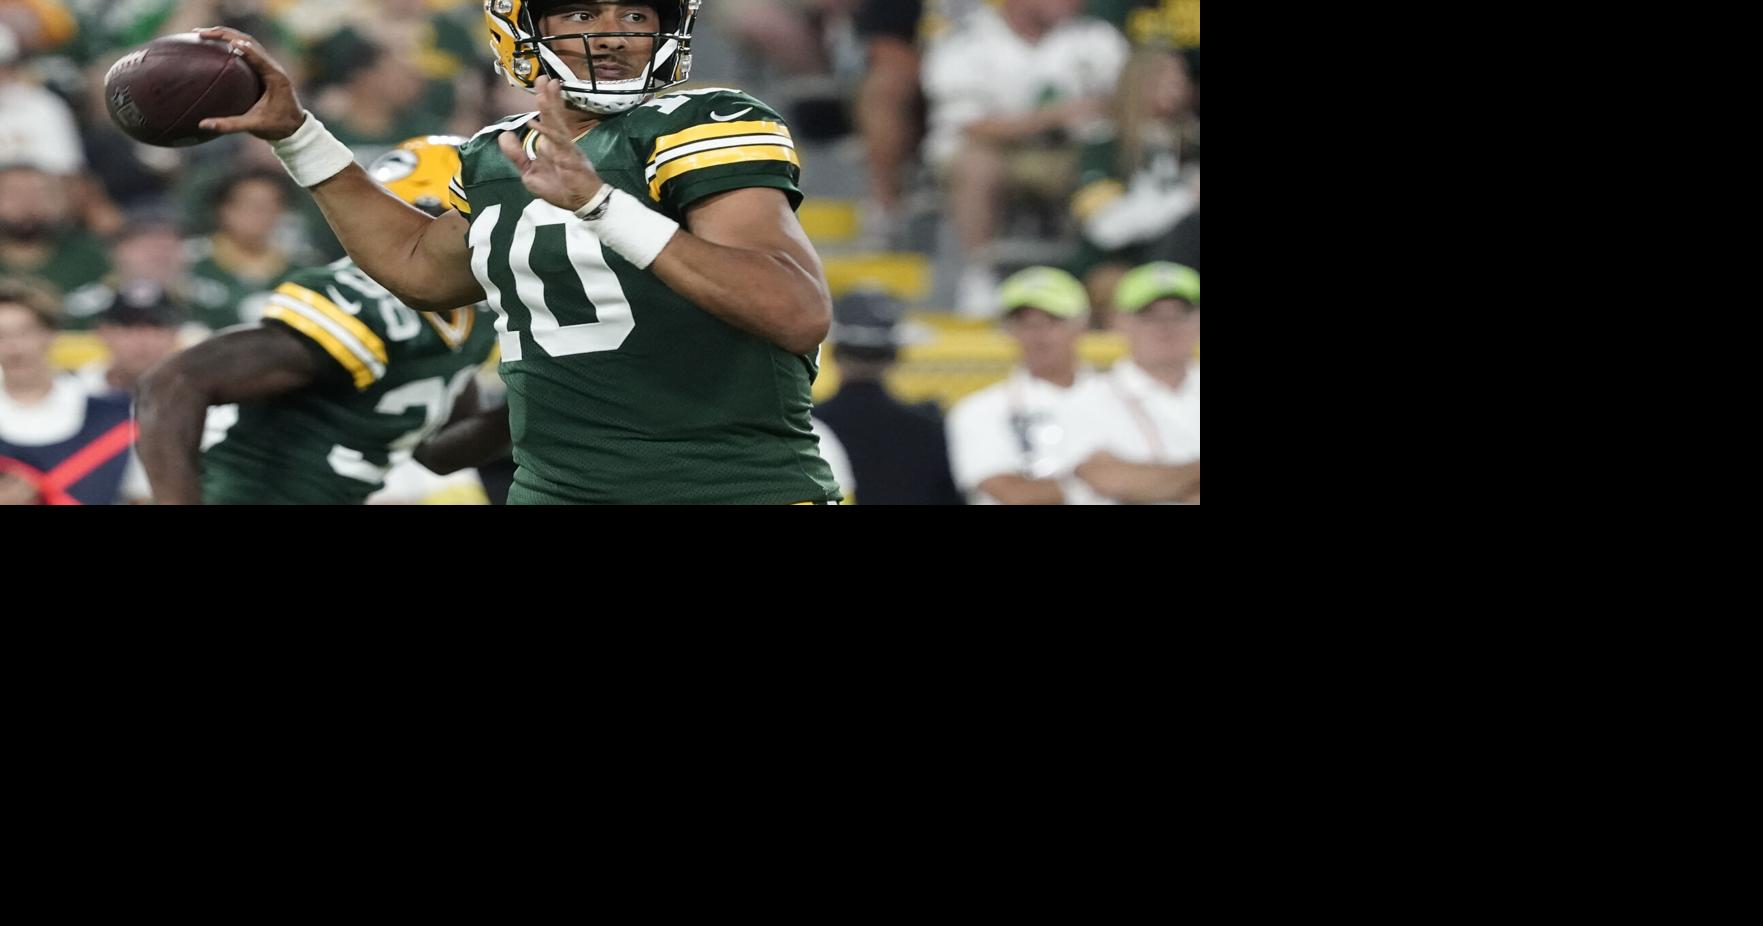 Green Bay Packers: If Jordan Love Plays, Look for him to “Let it Rip”